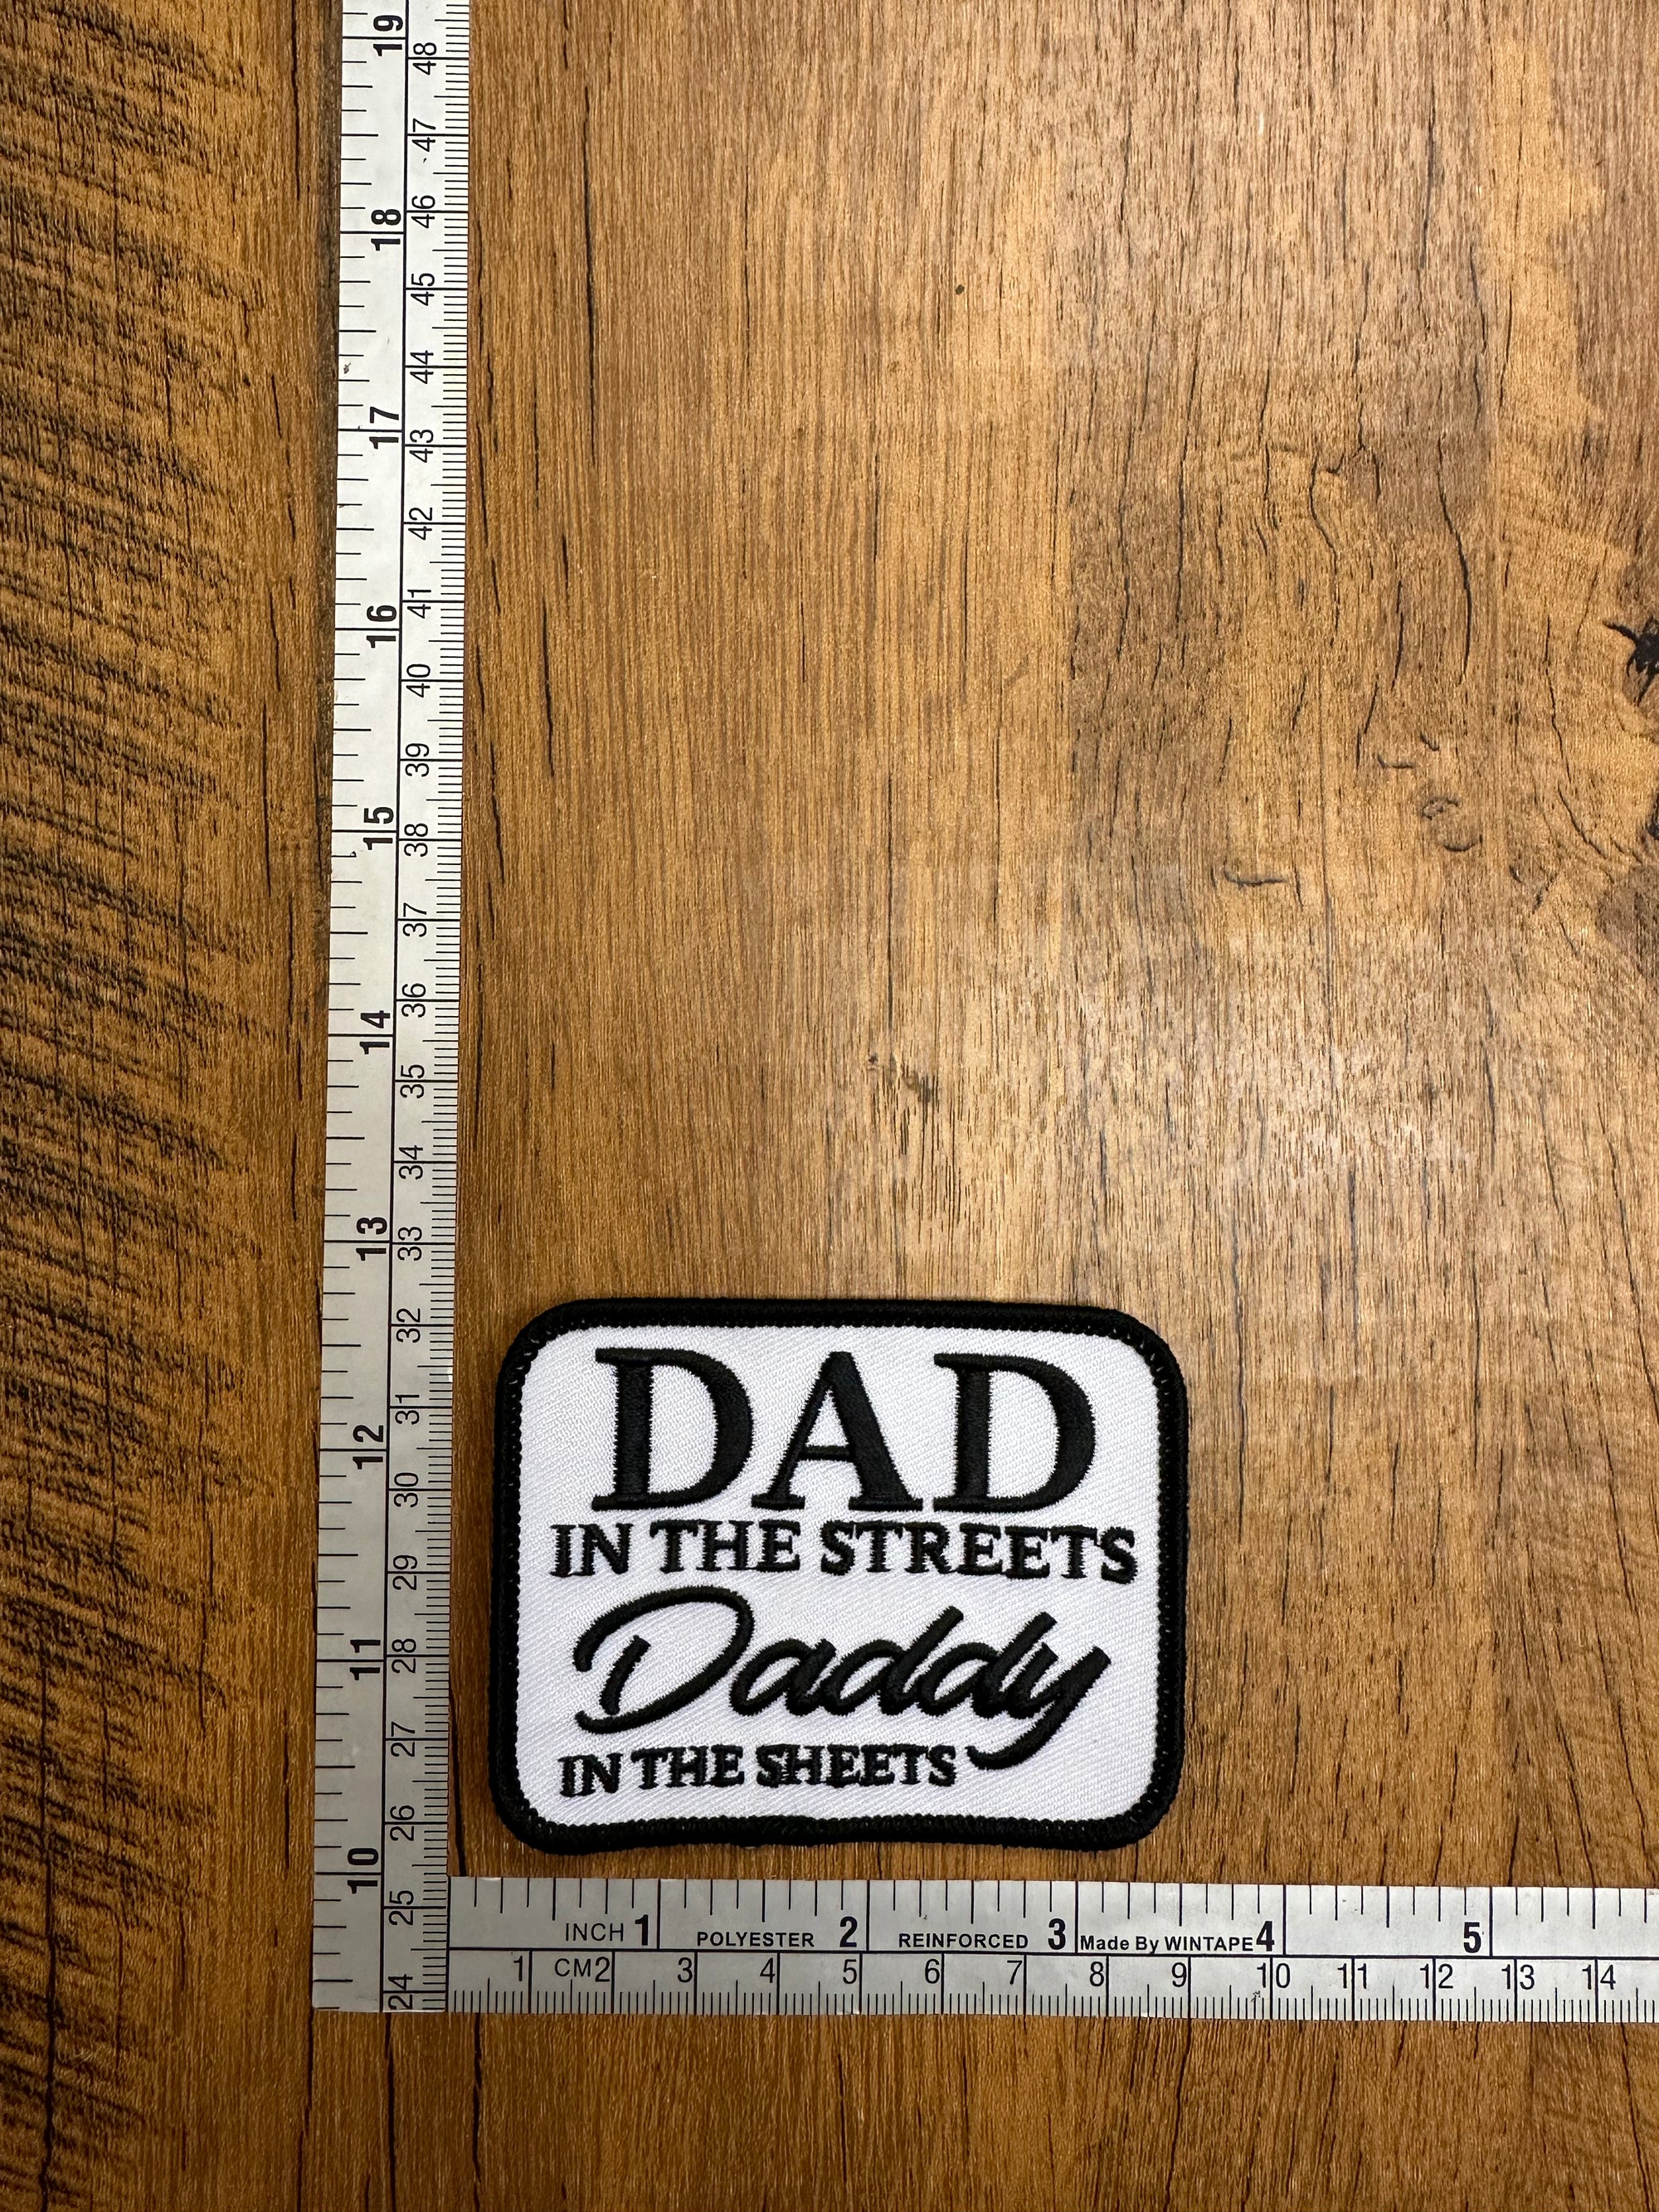 Dad in the Streets Daddy in the Sheets